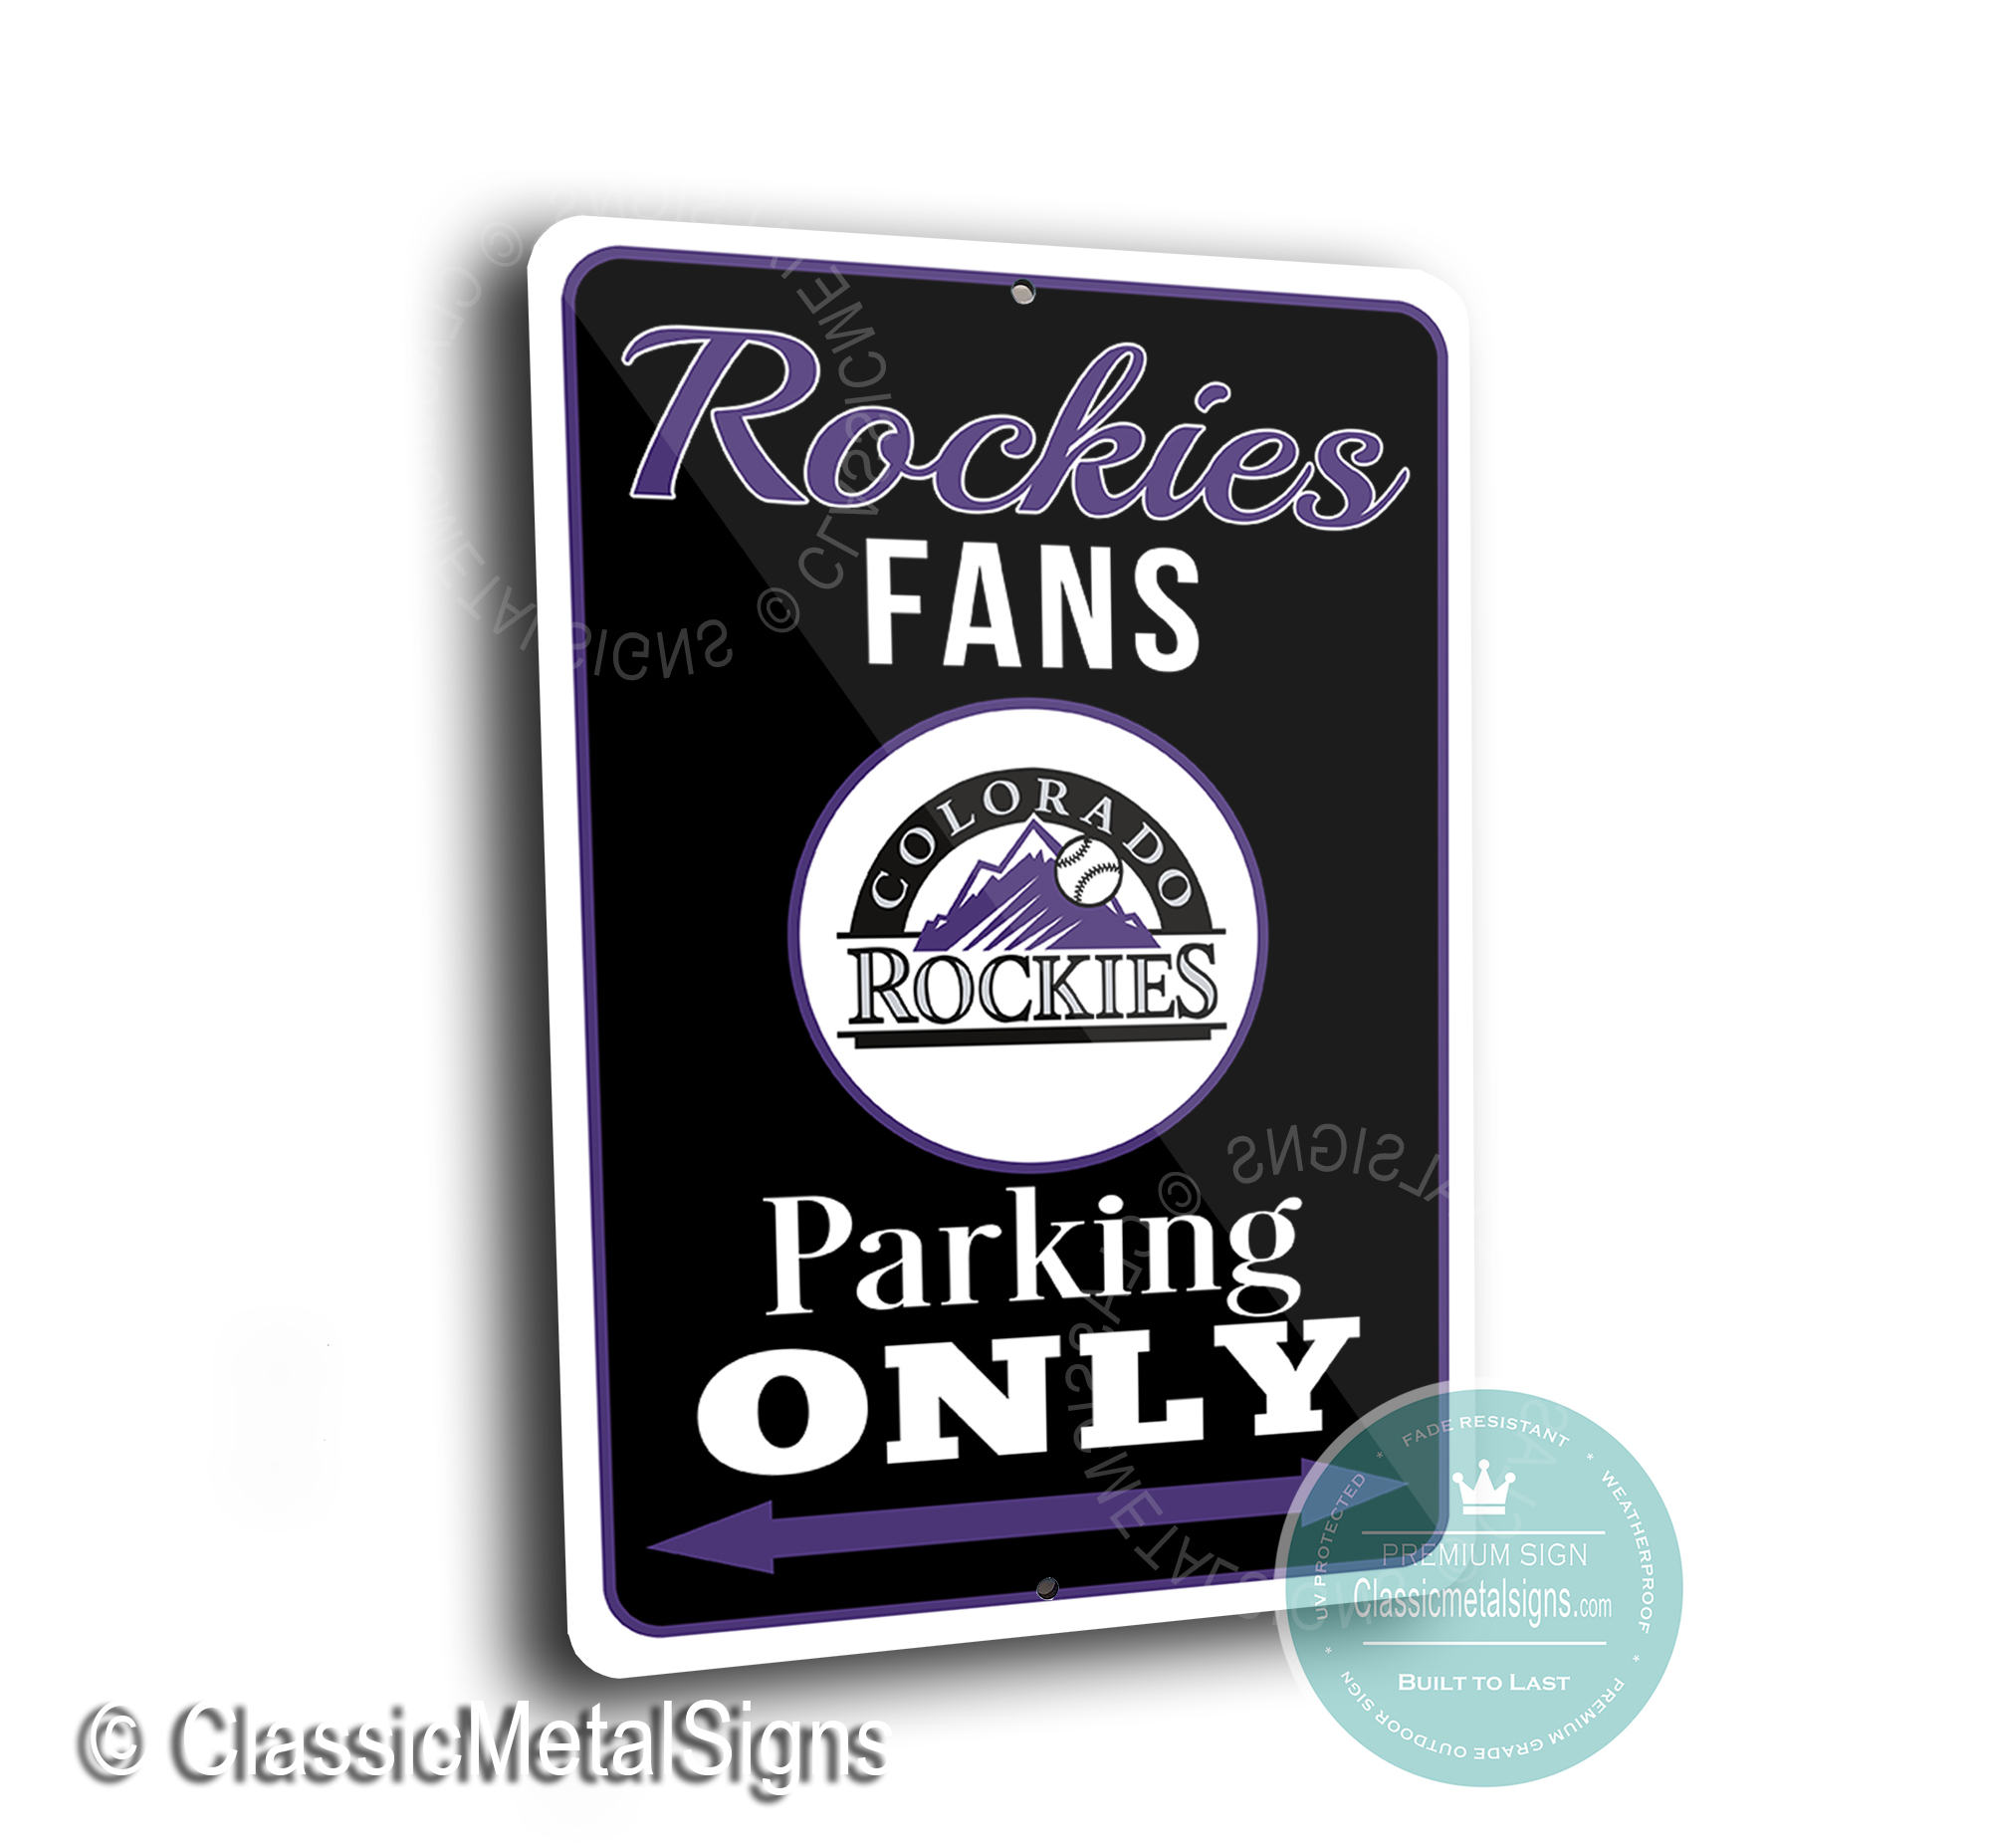 Rockies Parking Only sign